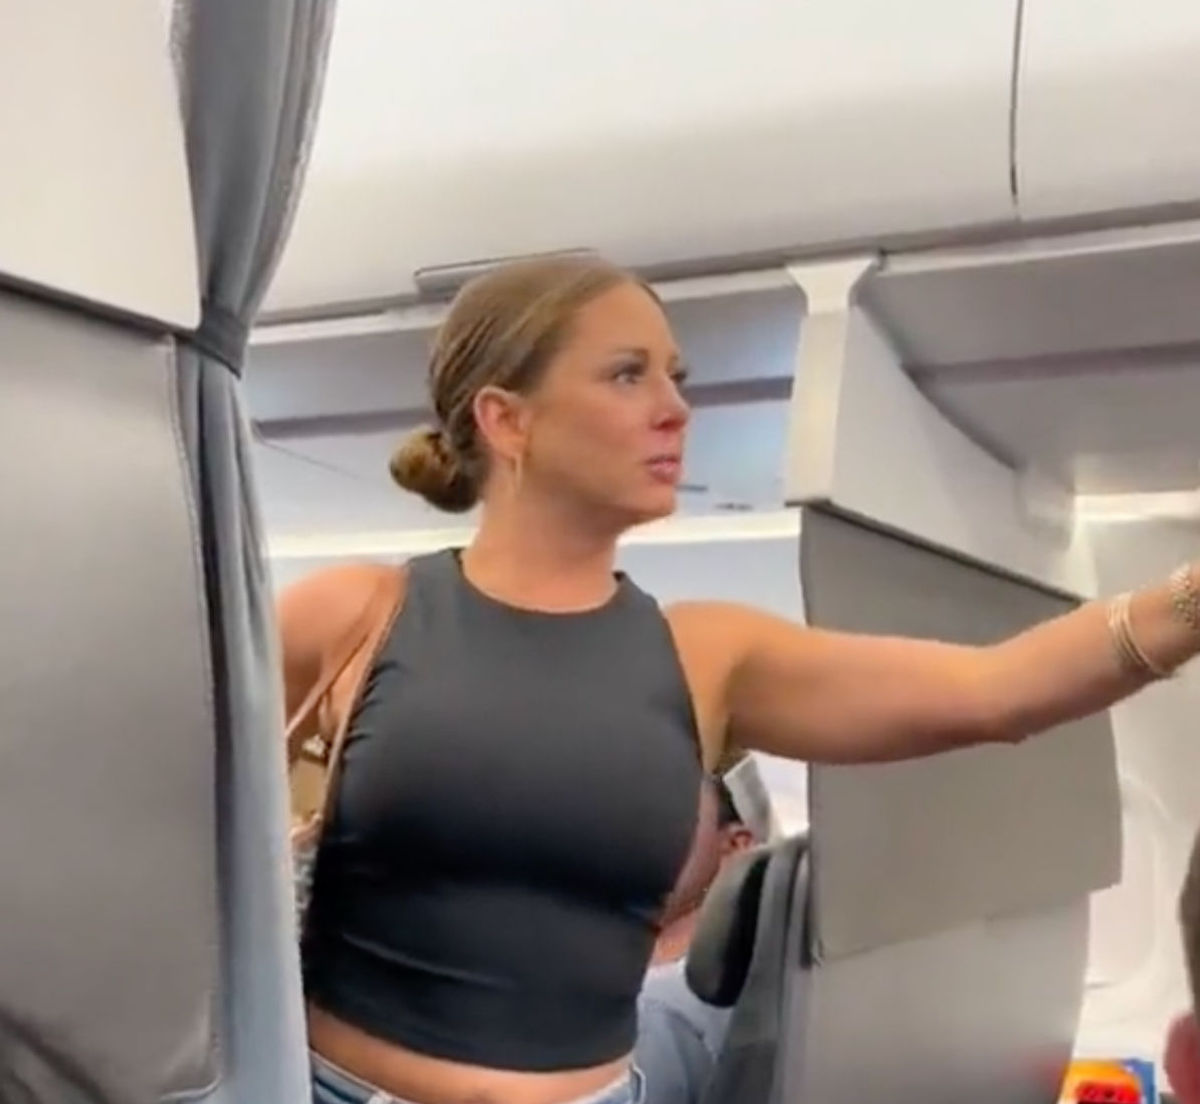 United Airlines Stopped Two Girls From Boarding Because They Were